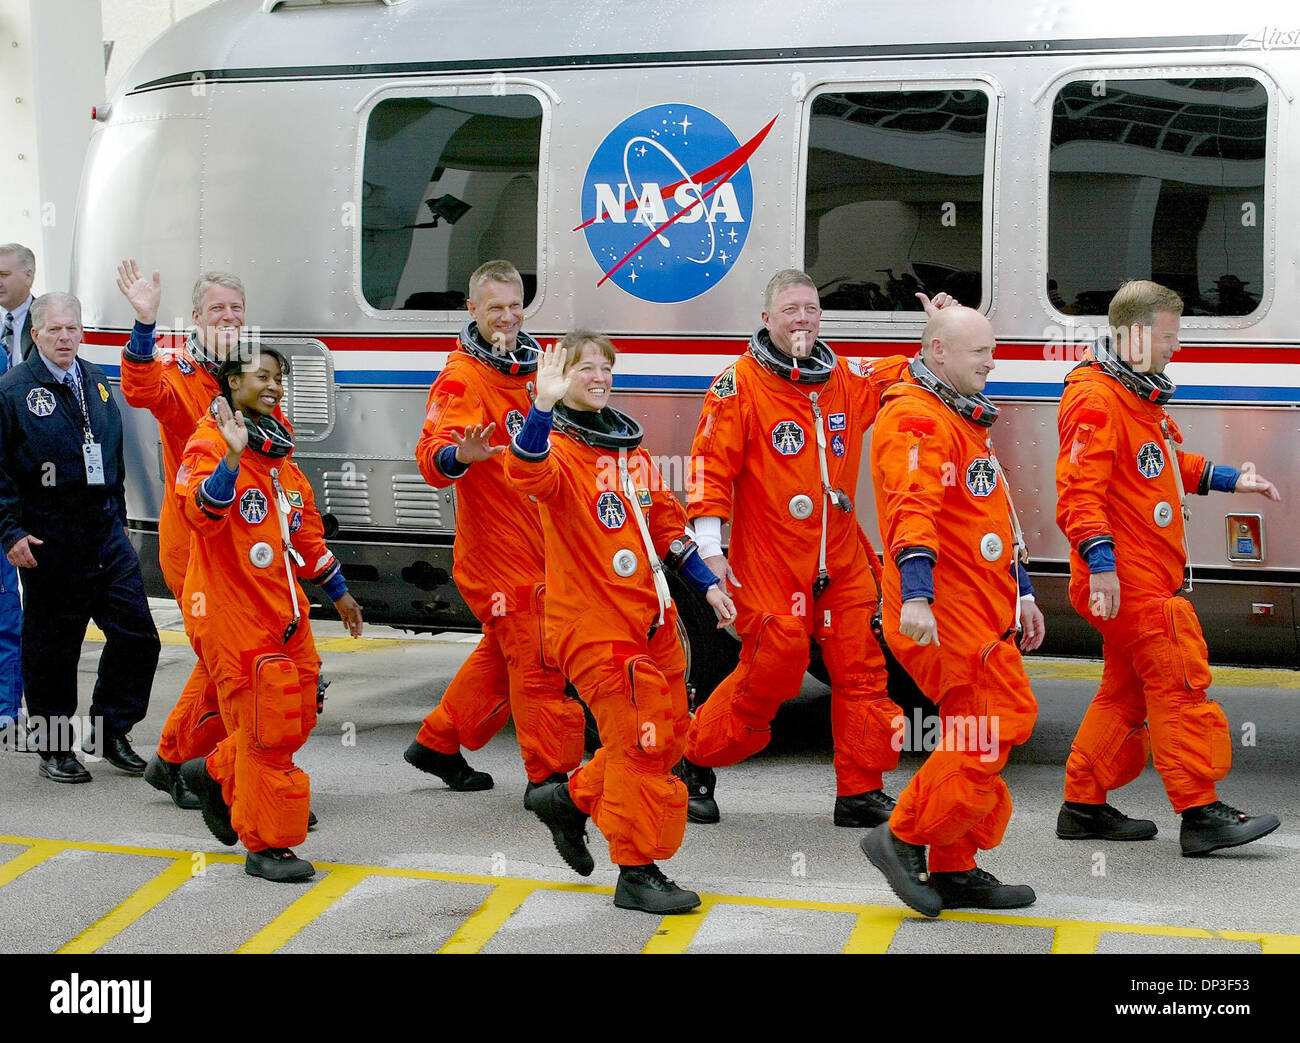 Jul 02, 2006; Cape Canaveral, FL, USA; Space shuttle Discovery crew members walkout Sunday morning on their way to the space craft at Kennedy Space Center. (LtoR) Astronauts Thomas Reiter of Germany,  Stephanie D. Wilson,  Peirs J. Sellers, Lisa M. Nowak,  Michael E. Fossum, Mark E. Kelly,  and commander Steven W. Lindsey. The bad weather forced NASA to reschedule the launch for Tu Stock Photo